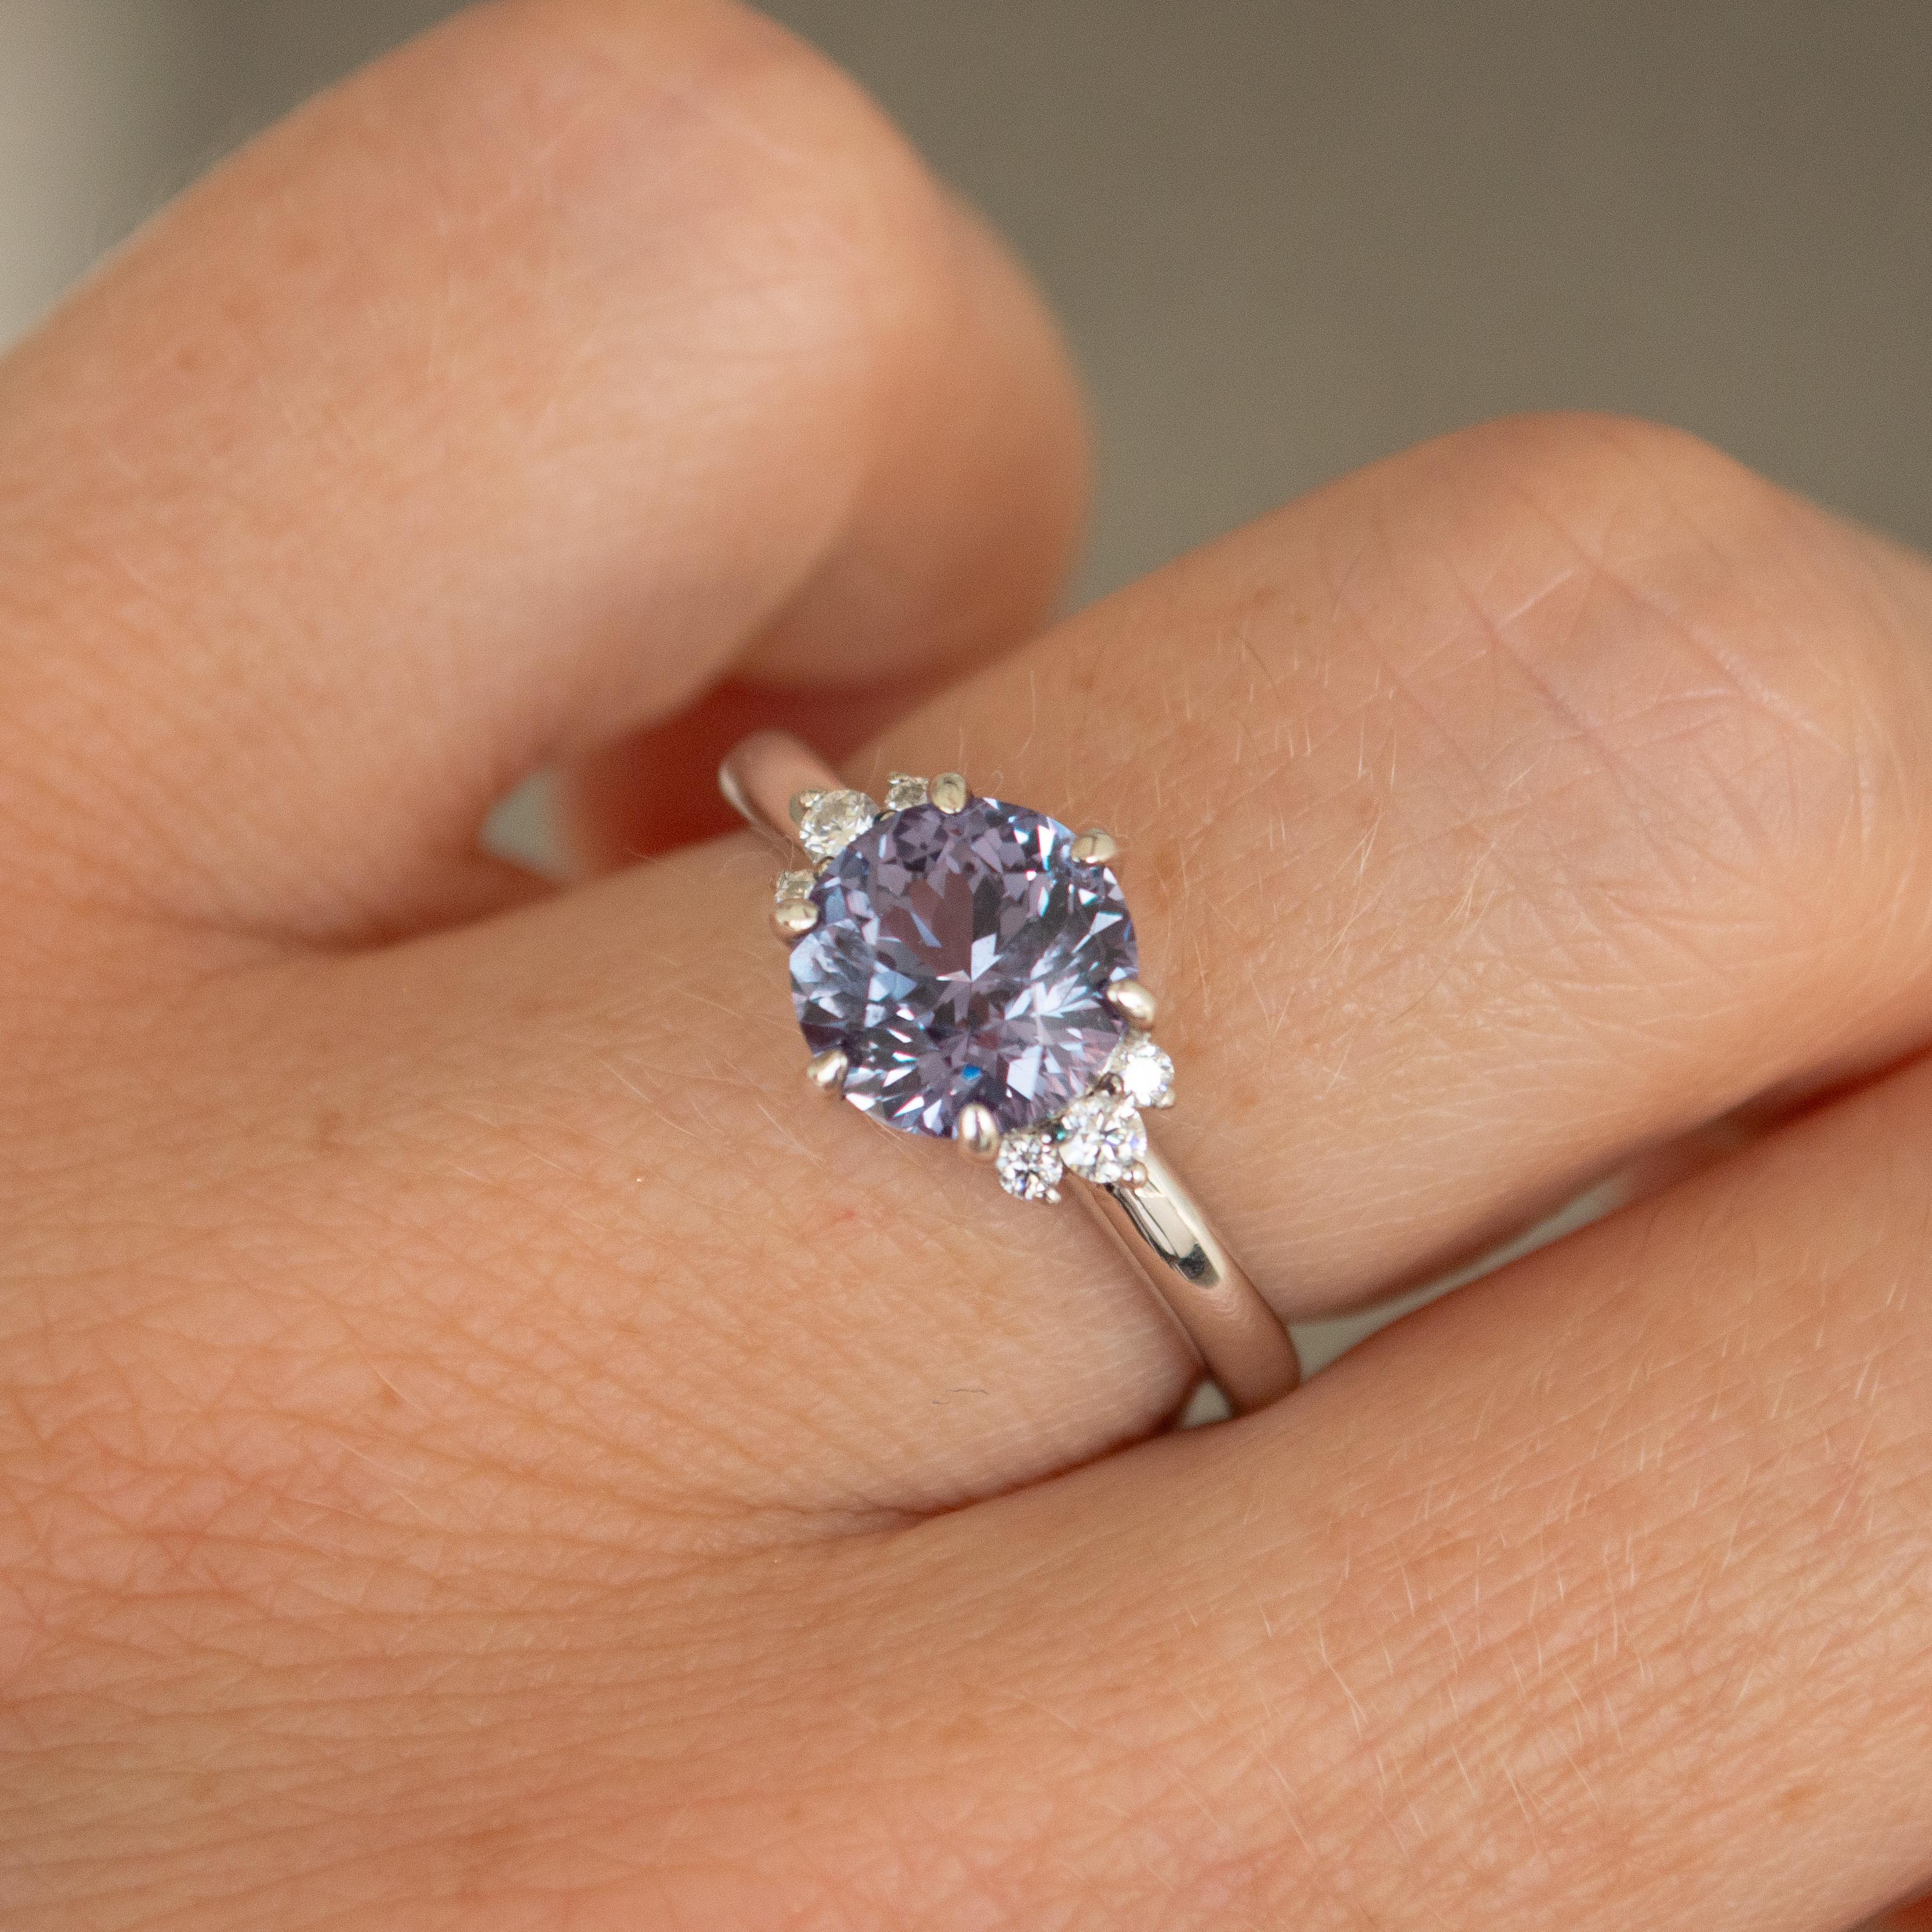 2 Carat Round Brilliant Cut Lilac Sapphire Featuring 6 Accenting Lab Grown Diamonds